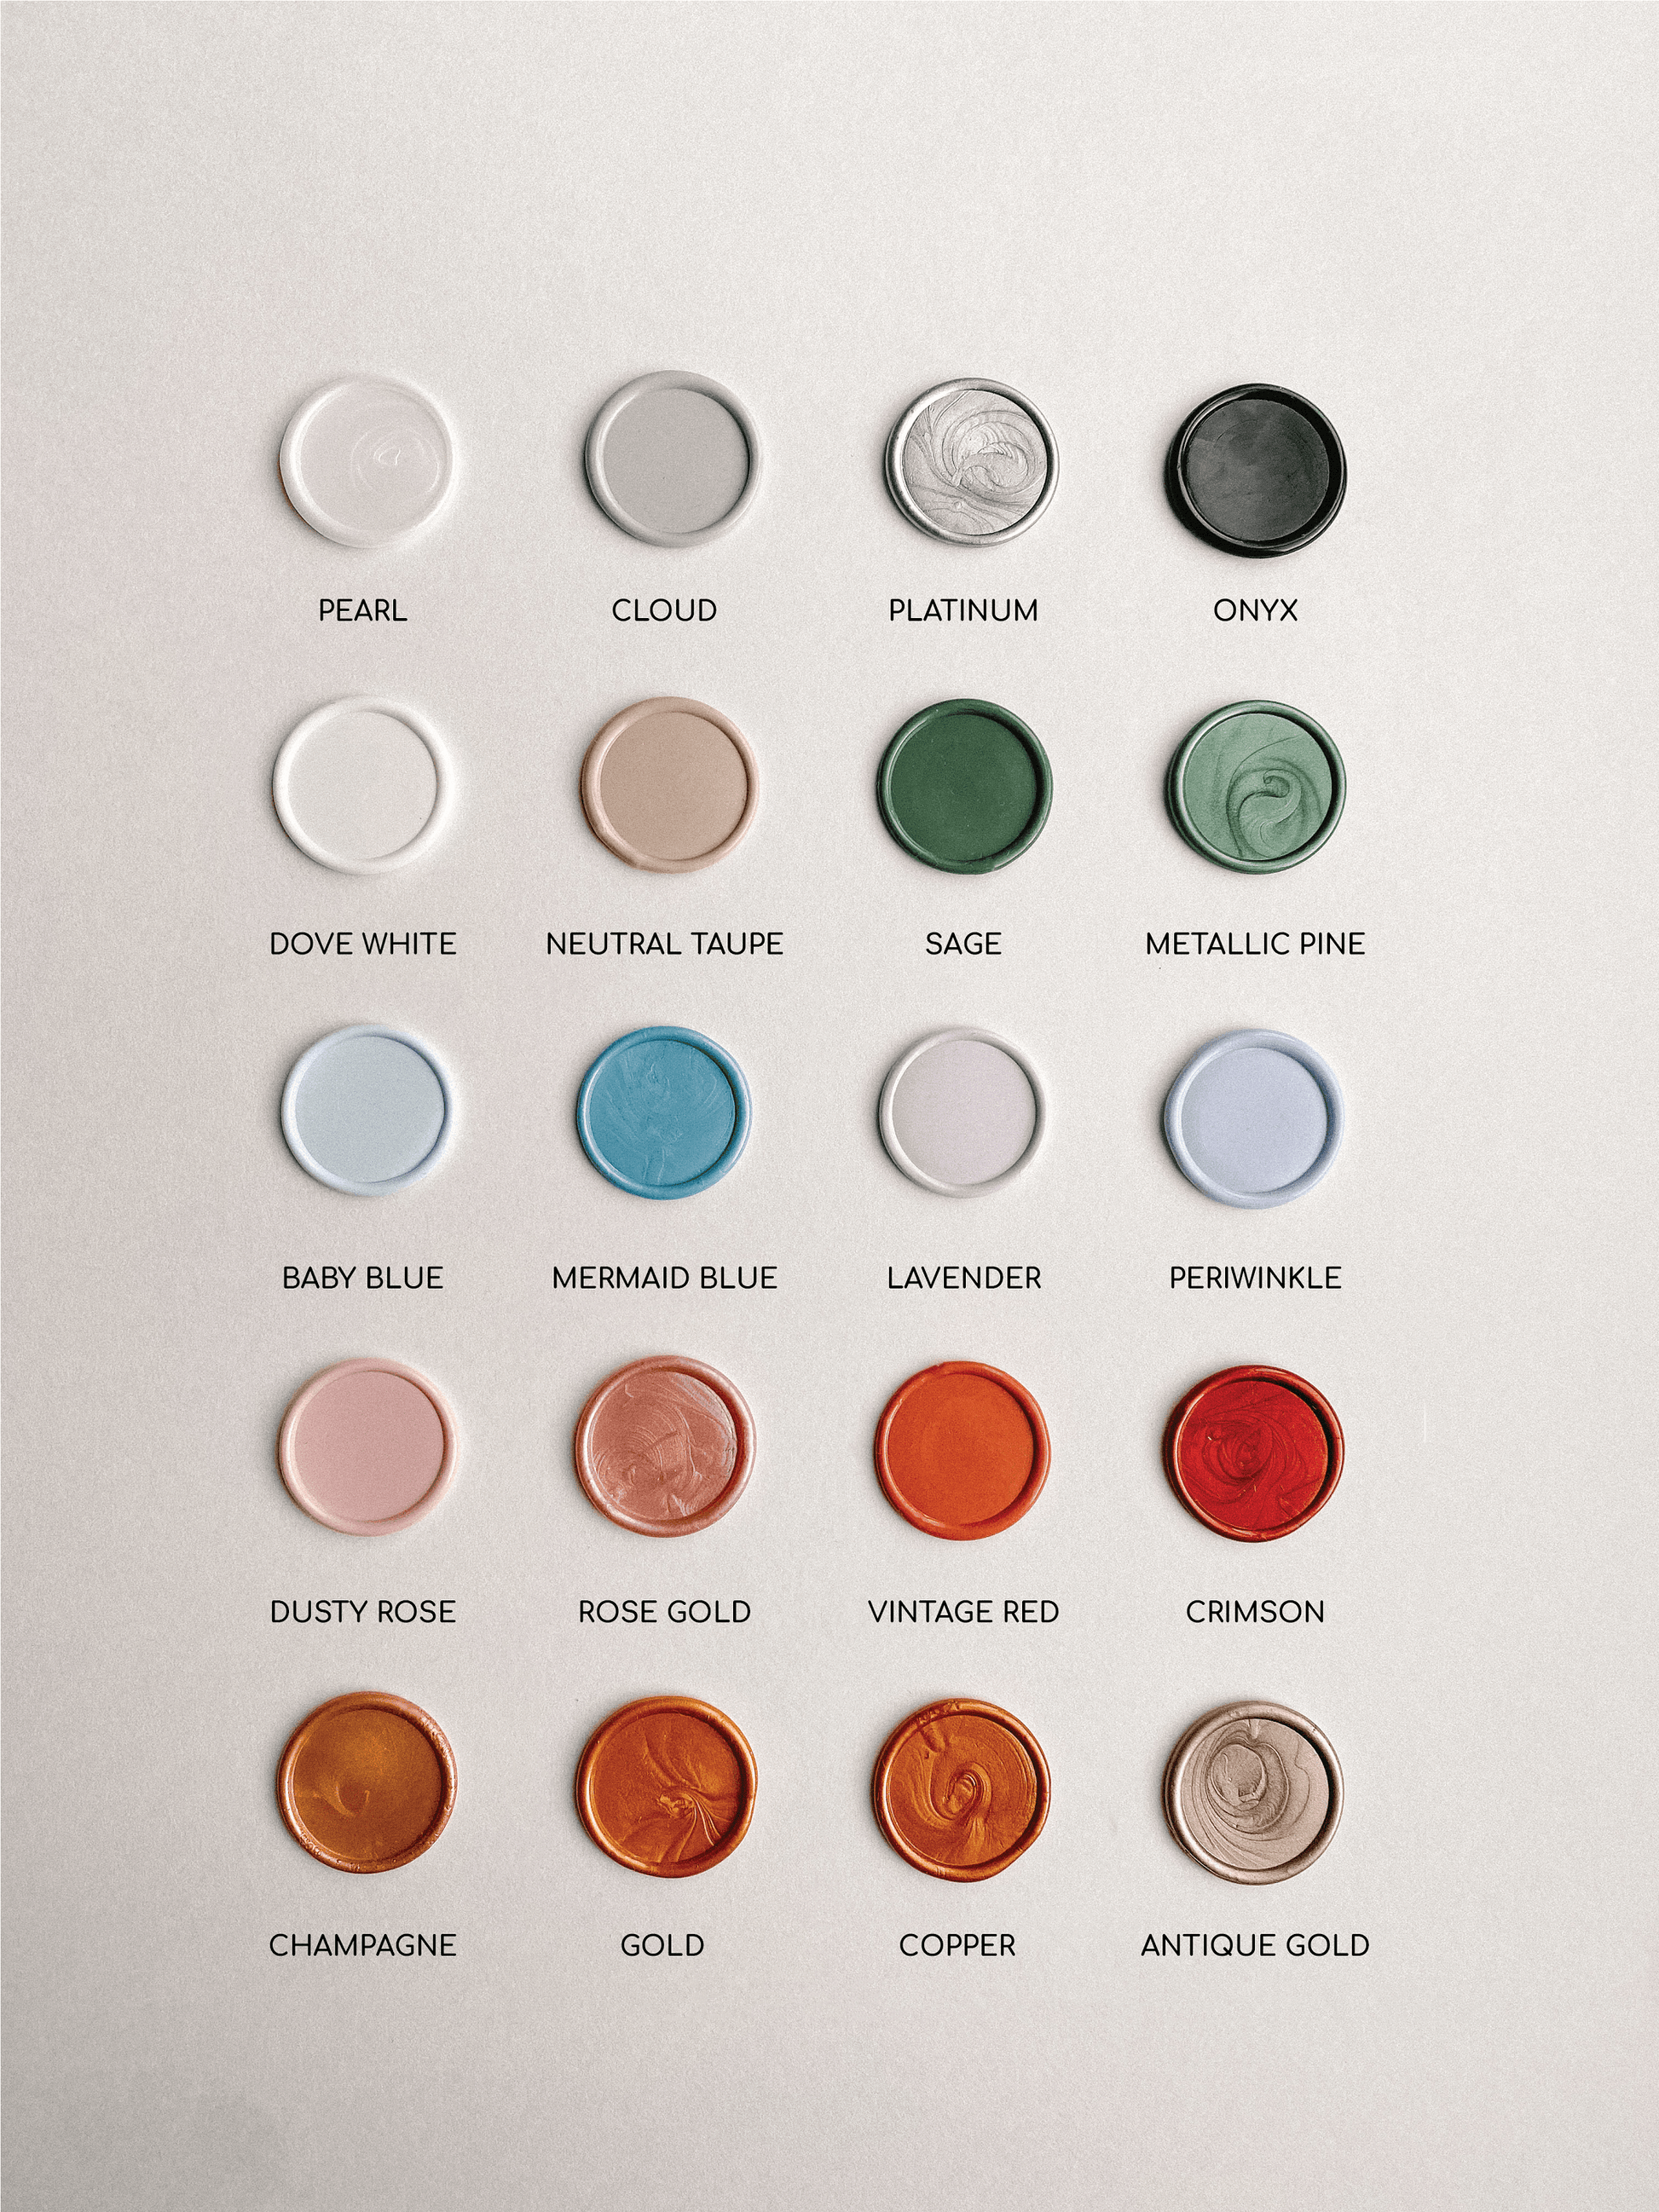 Christmas wax seals - Set of 9 - Made of Honour Co.